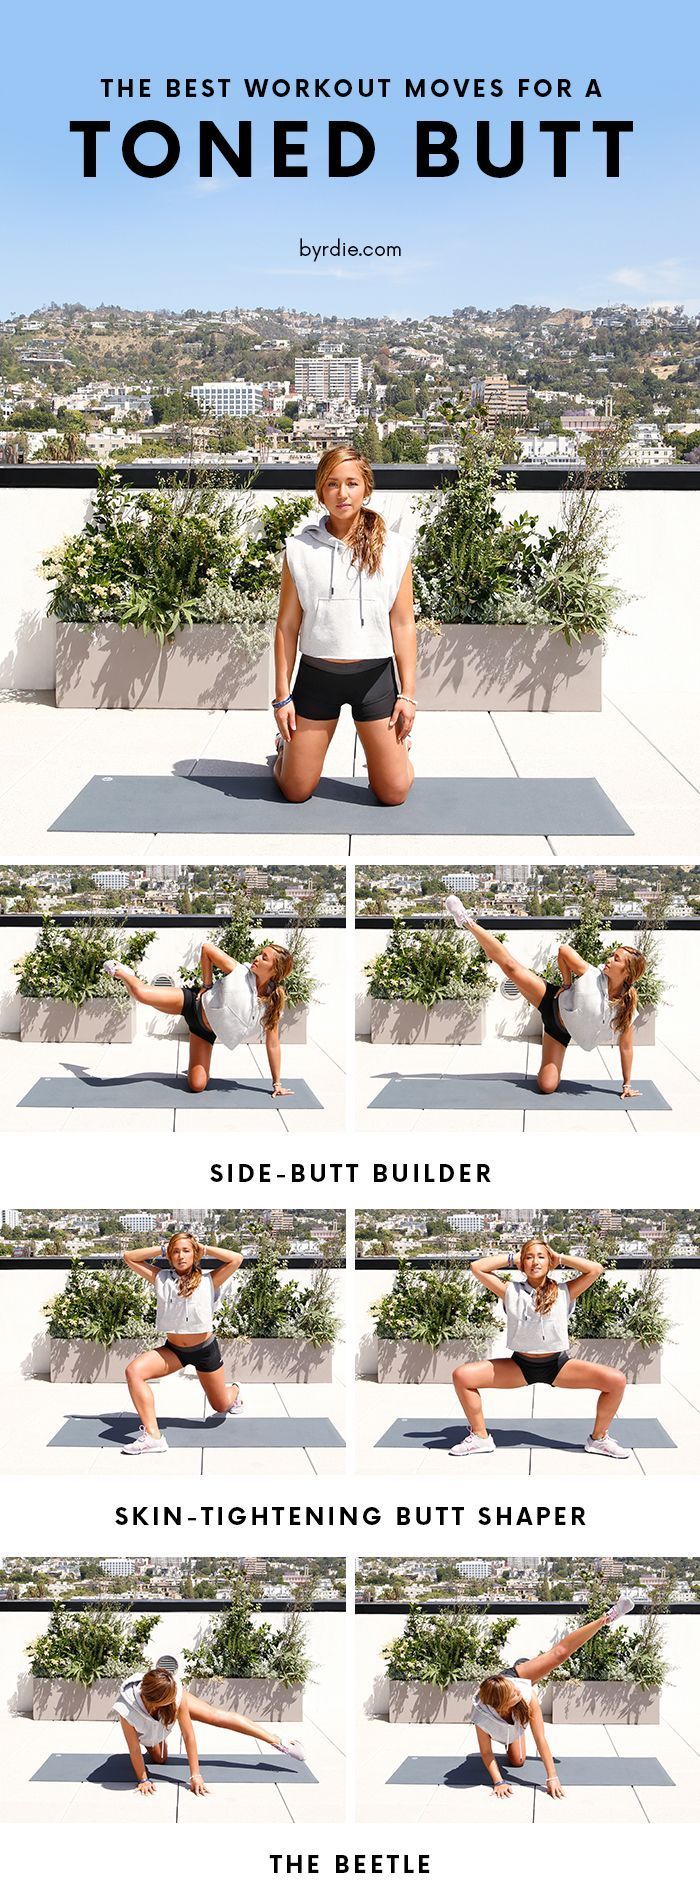 How to get a better butt that is toned and firm